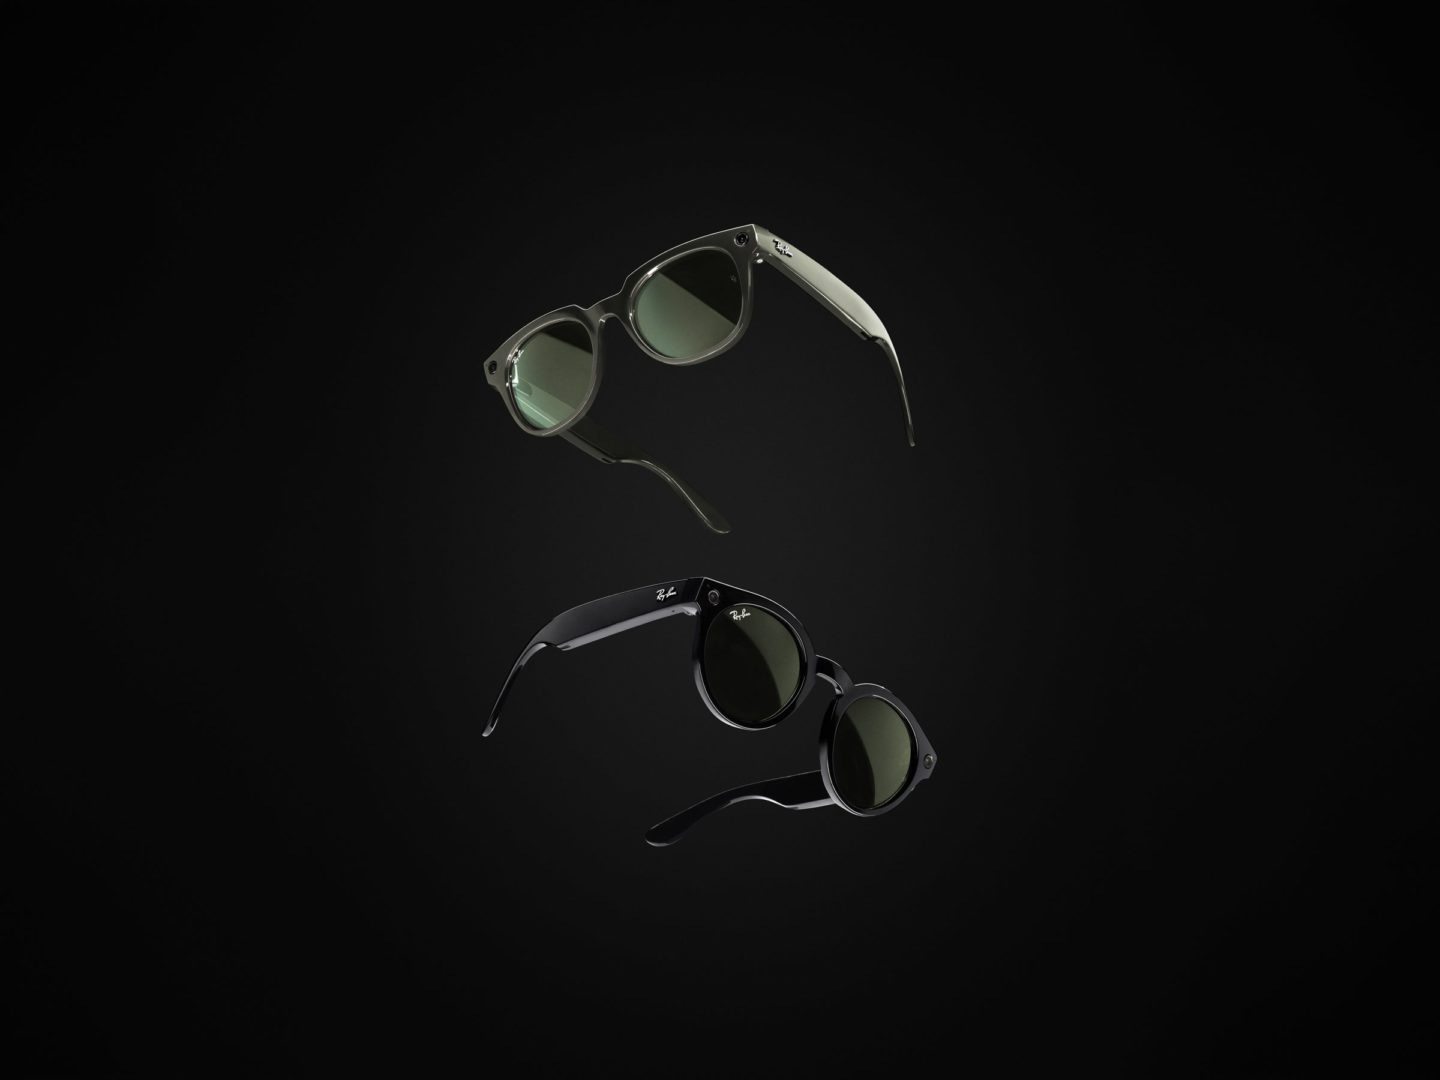 Facebook will launch its smart glass built in partnership with Ray-Ban today